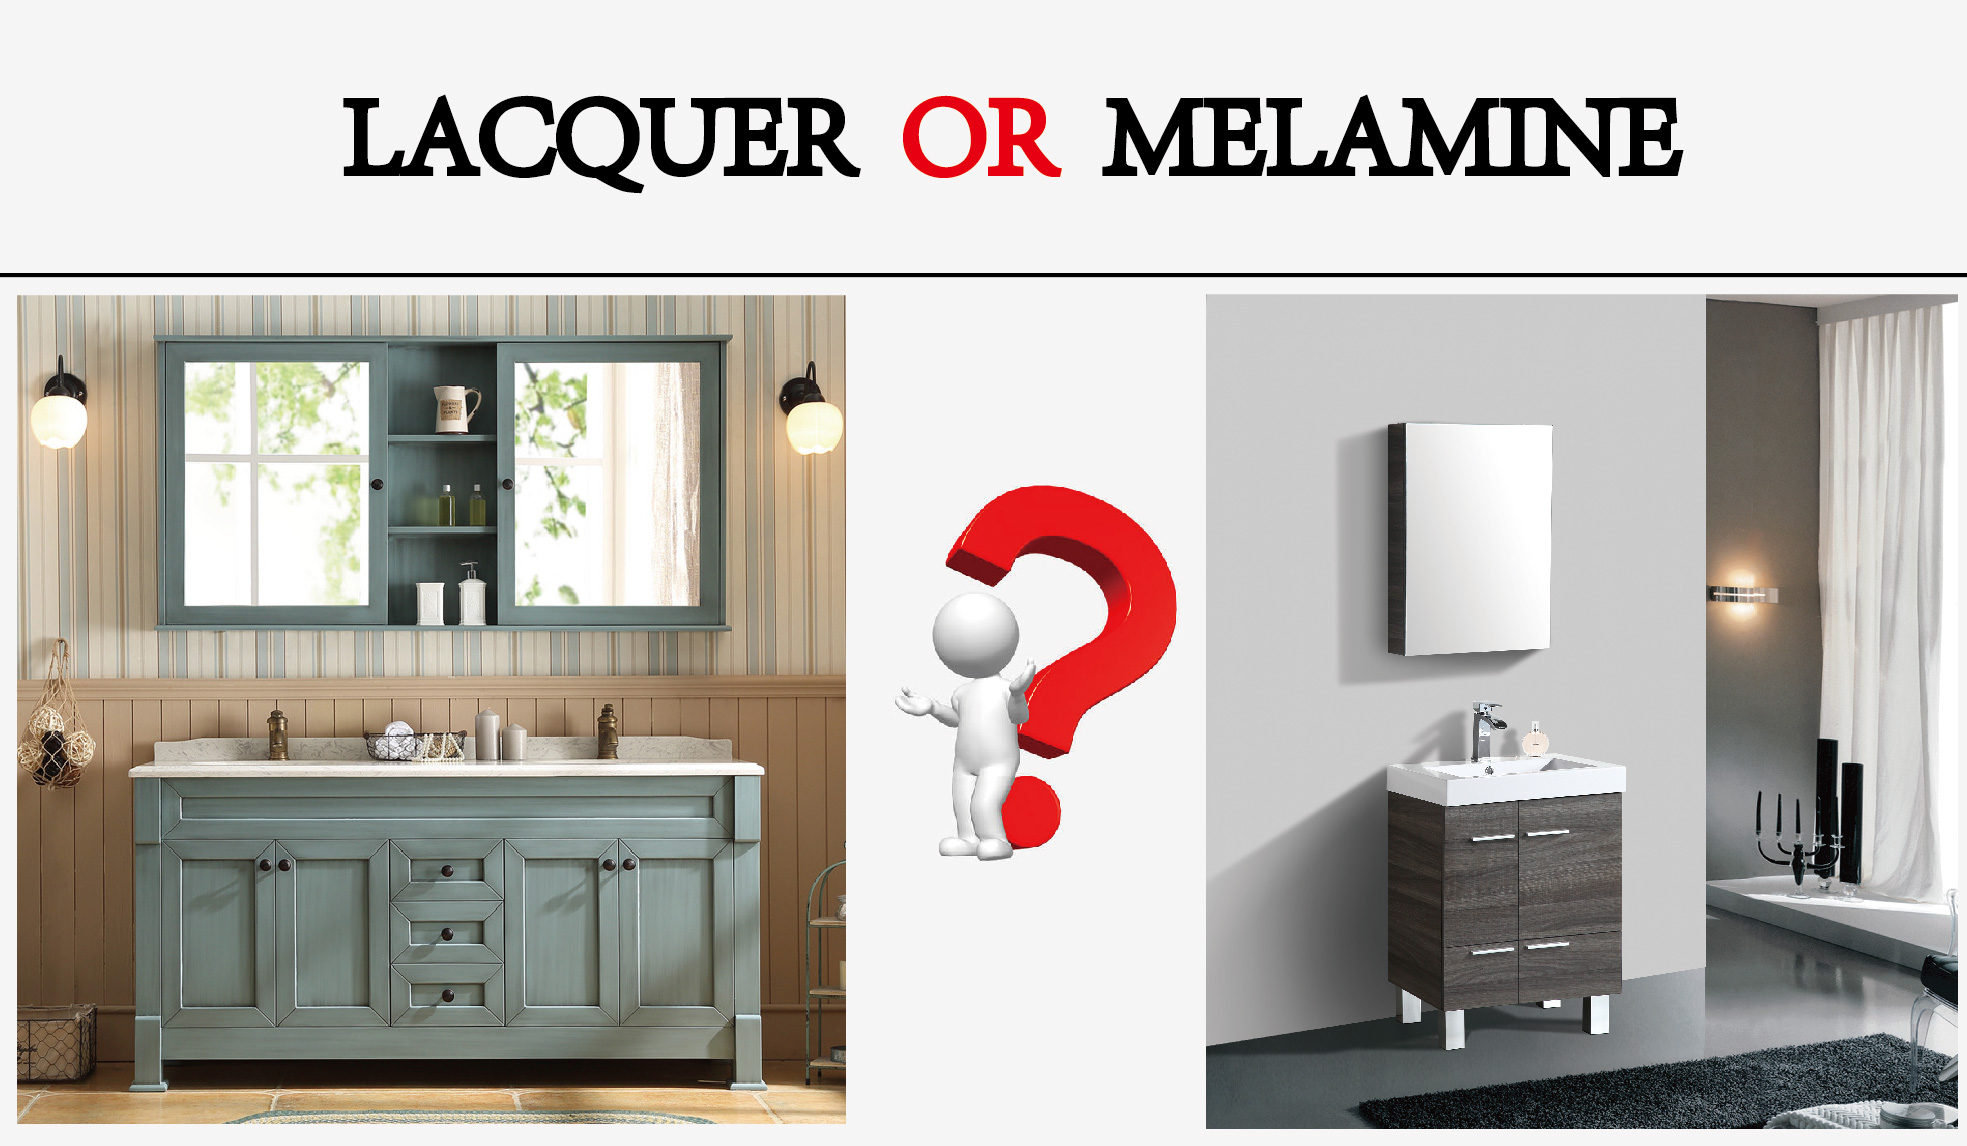 LACQUERED OR MELAMINE?